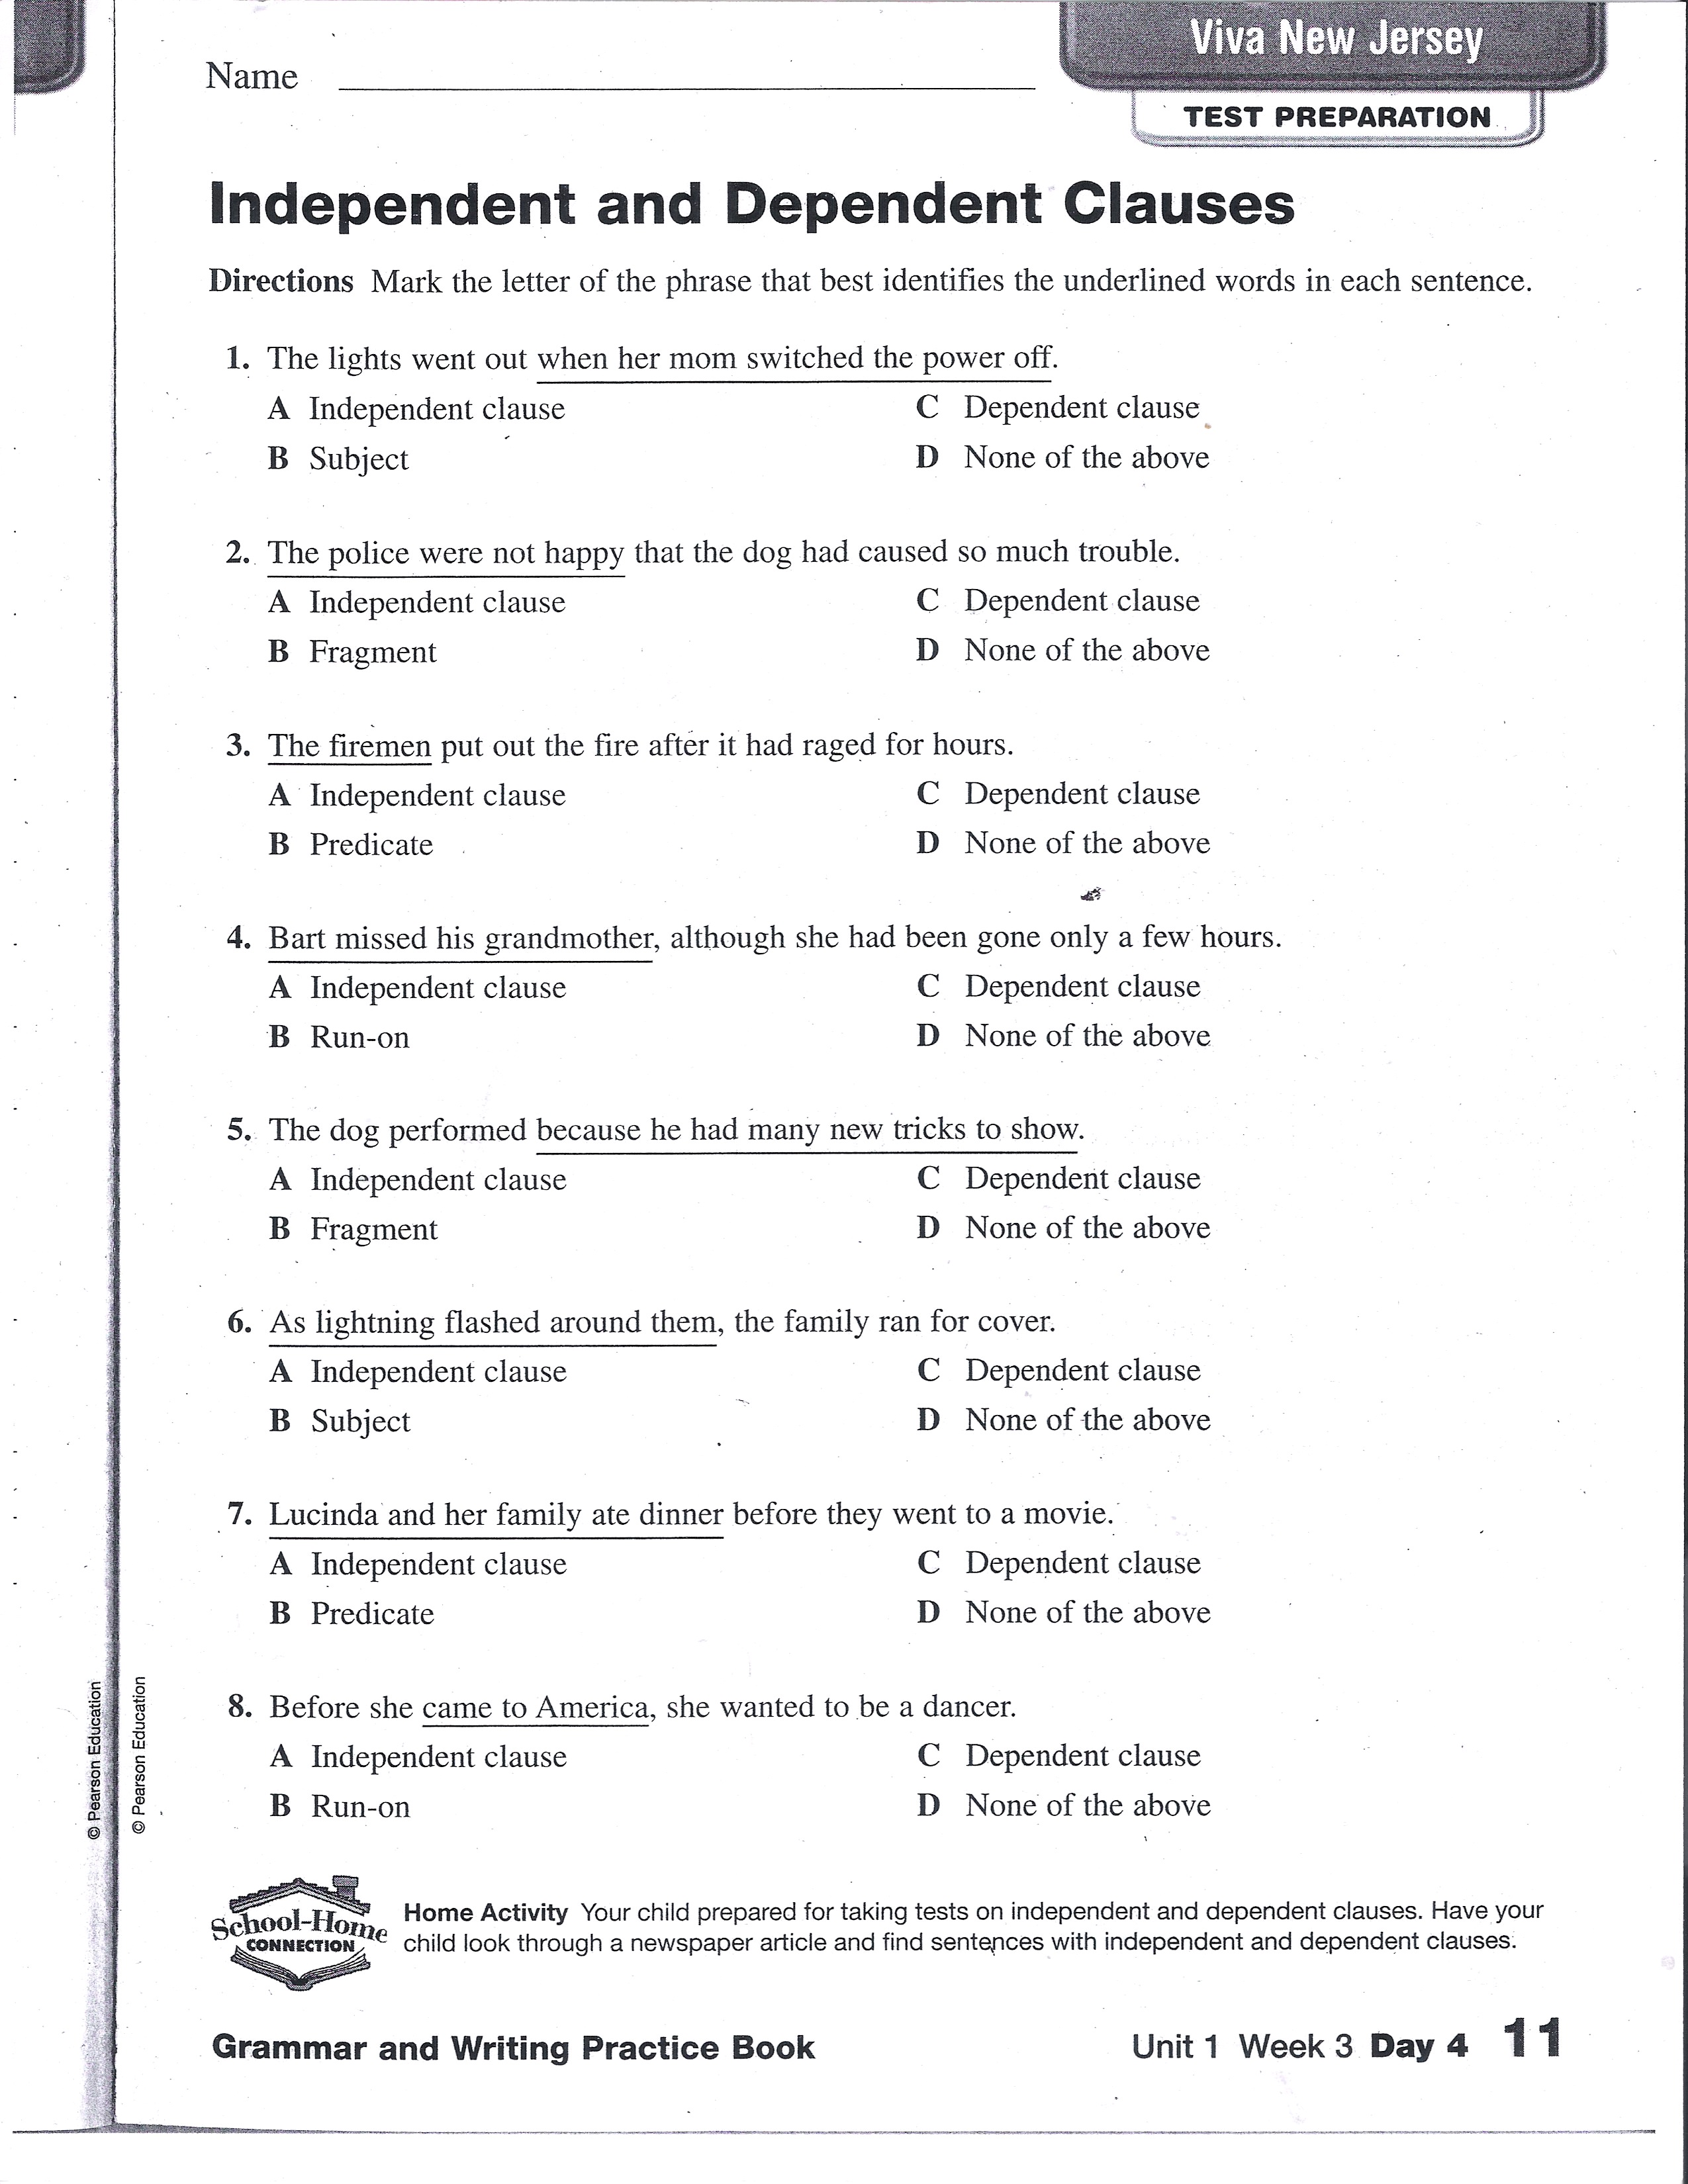 independent-and-dependent-clauses-worksheet